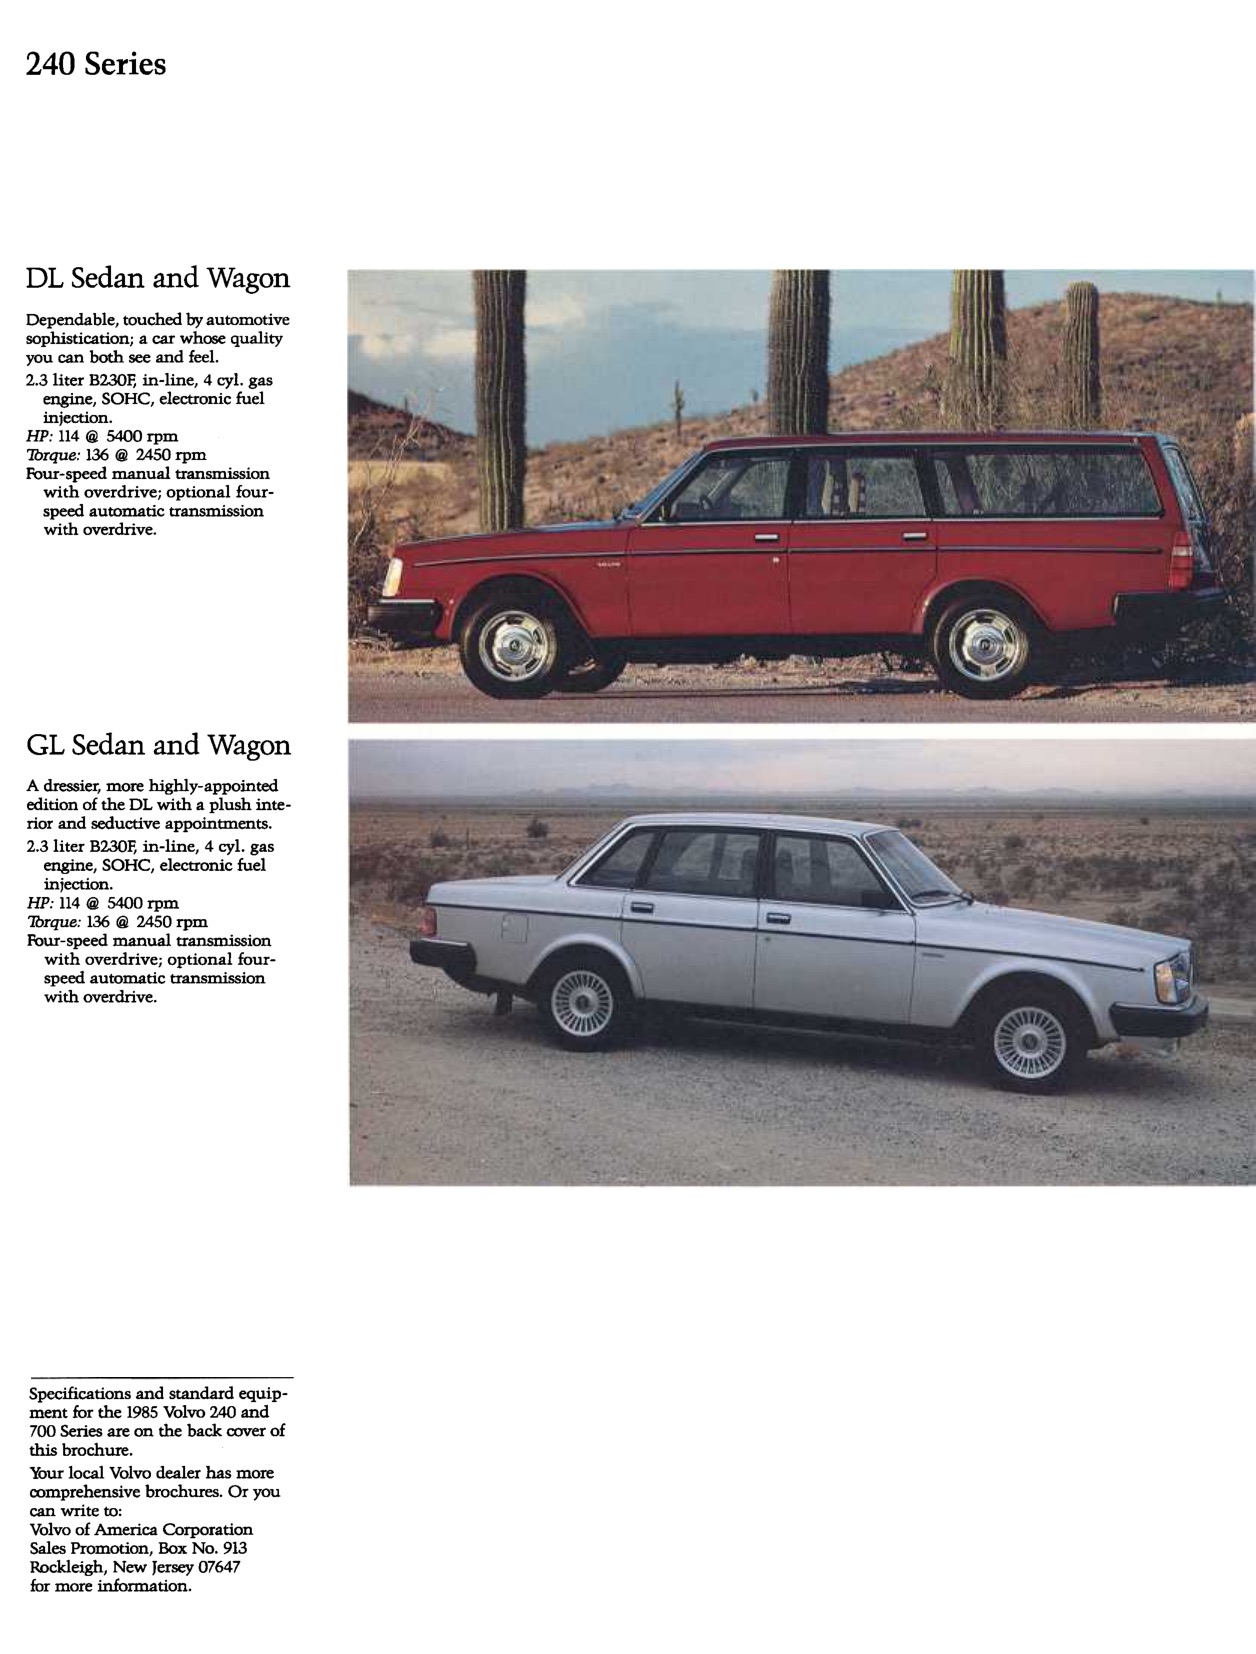 1985 Volvo Full-Line Brochure Page 5